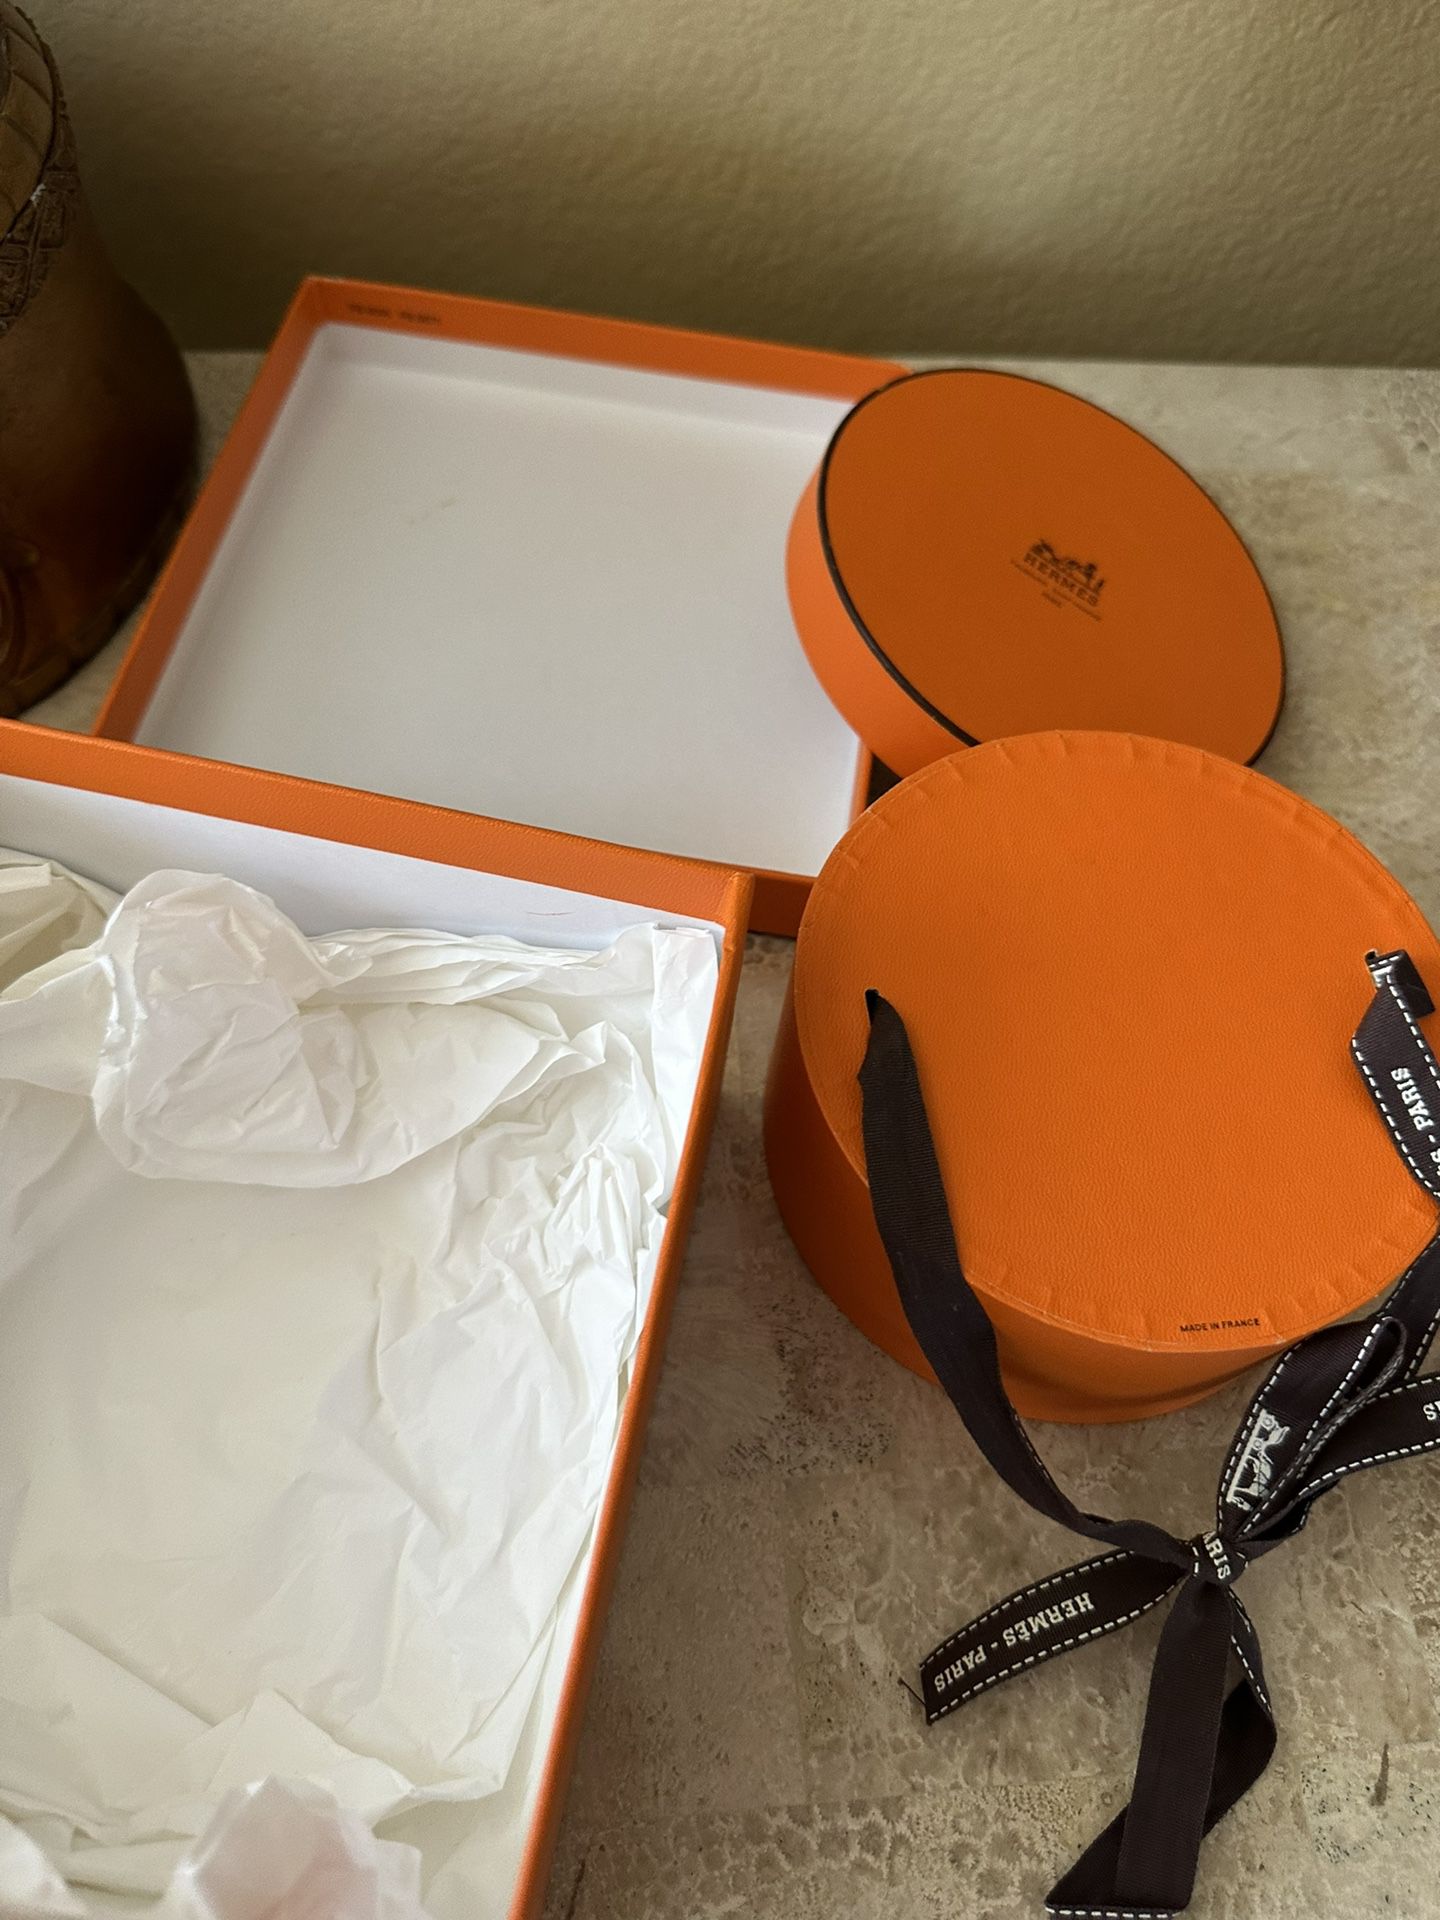 HERMES Authentic EMPTY BOX Paris ACCESSORY BOX Container BOX Gift BOX  PriceCHEAP for Sale in Los Angeles, CA - OfferUp